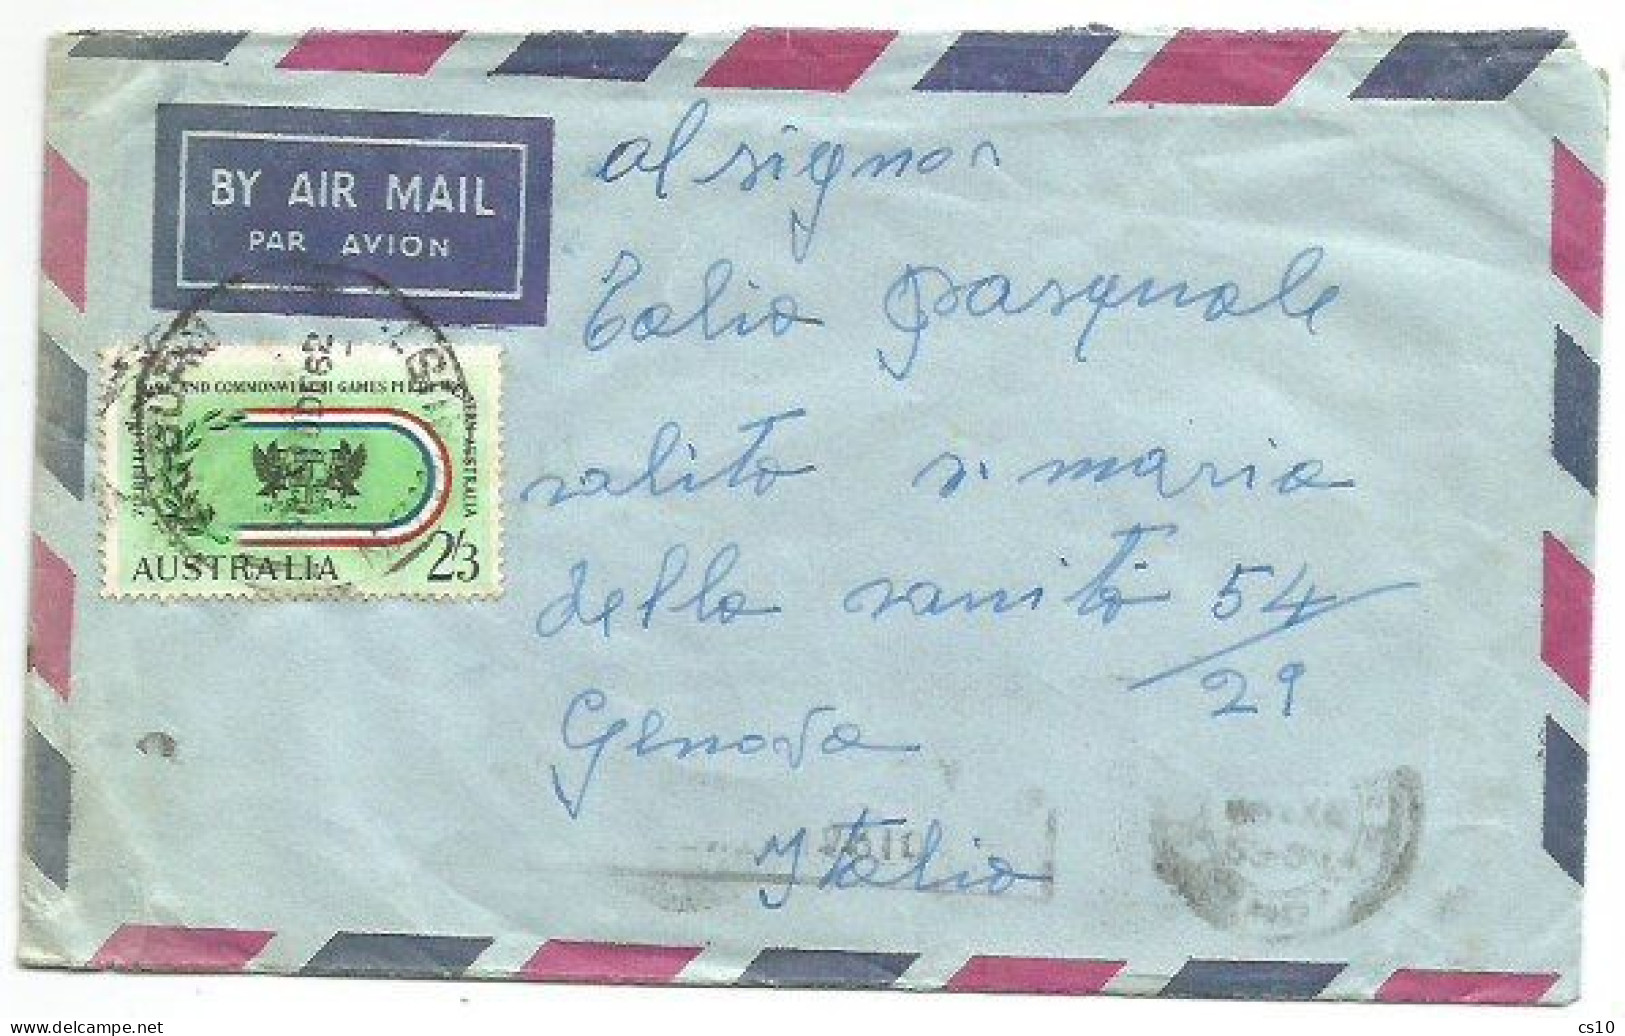 Australia Commonwealth Games 2S3 Solo Franking Airmail Cover Sidney 10dec1962 X Italy - Briefe U. Dokumente